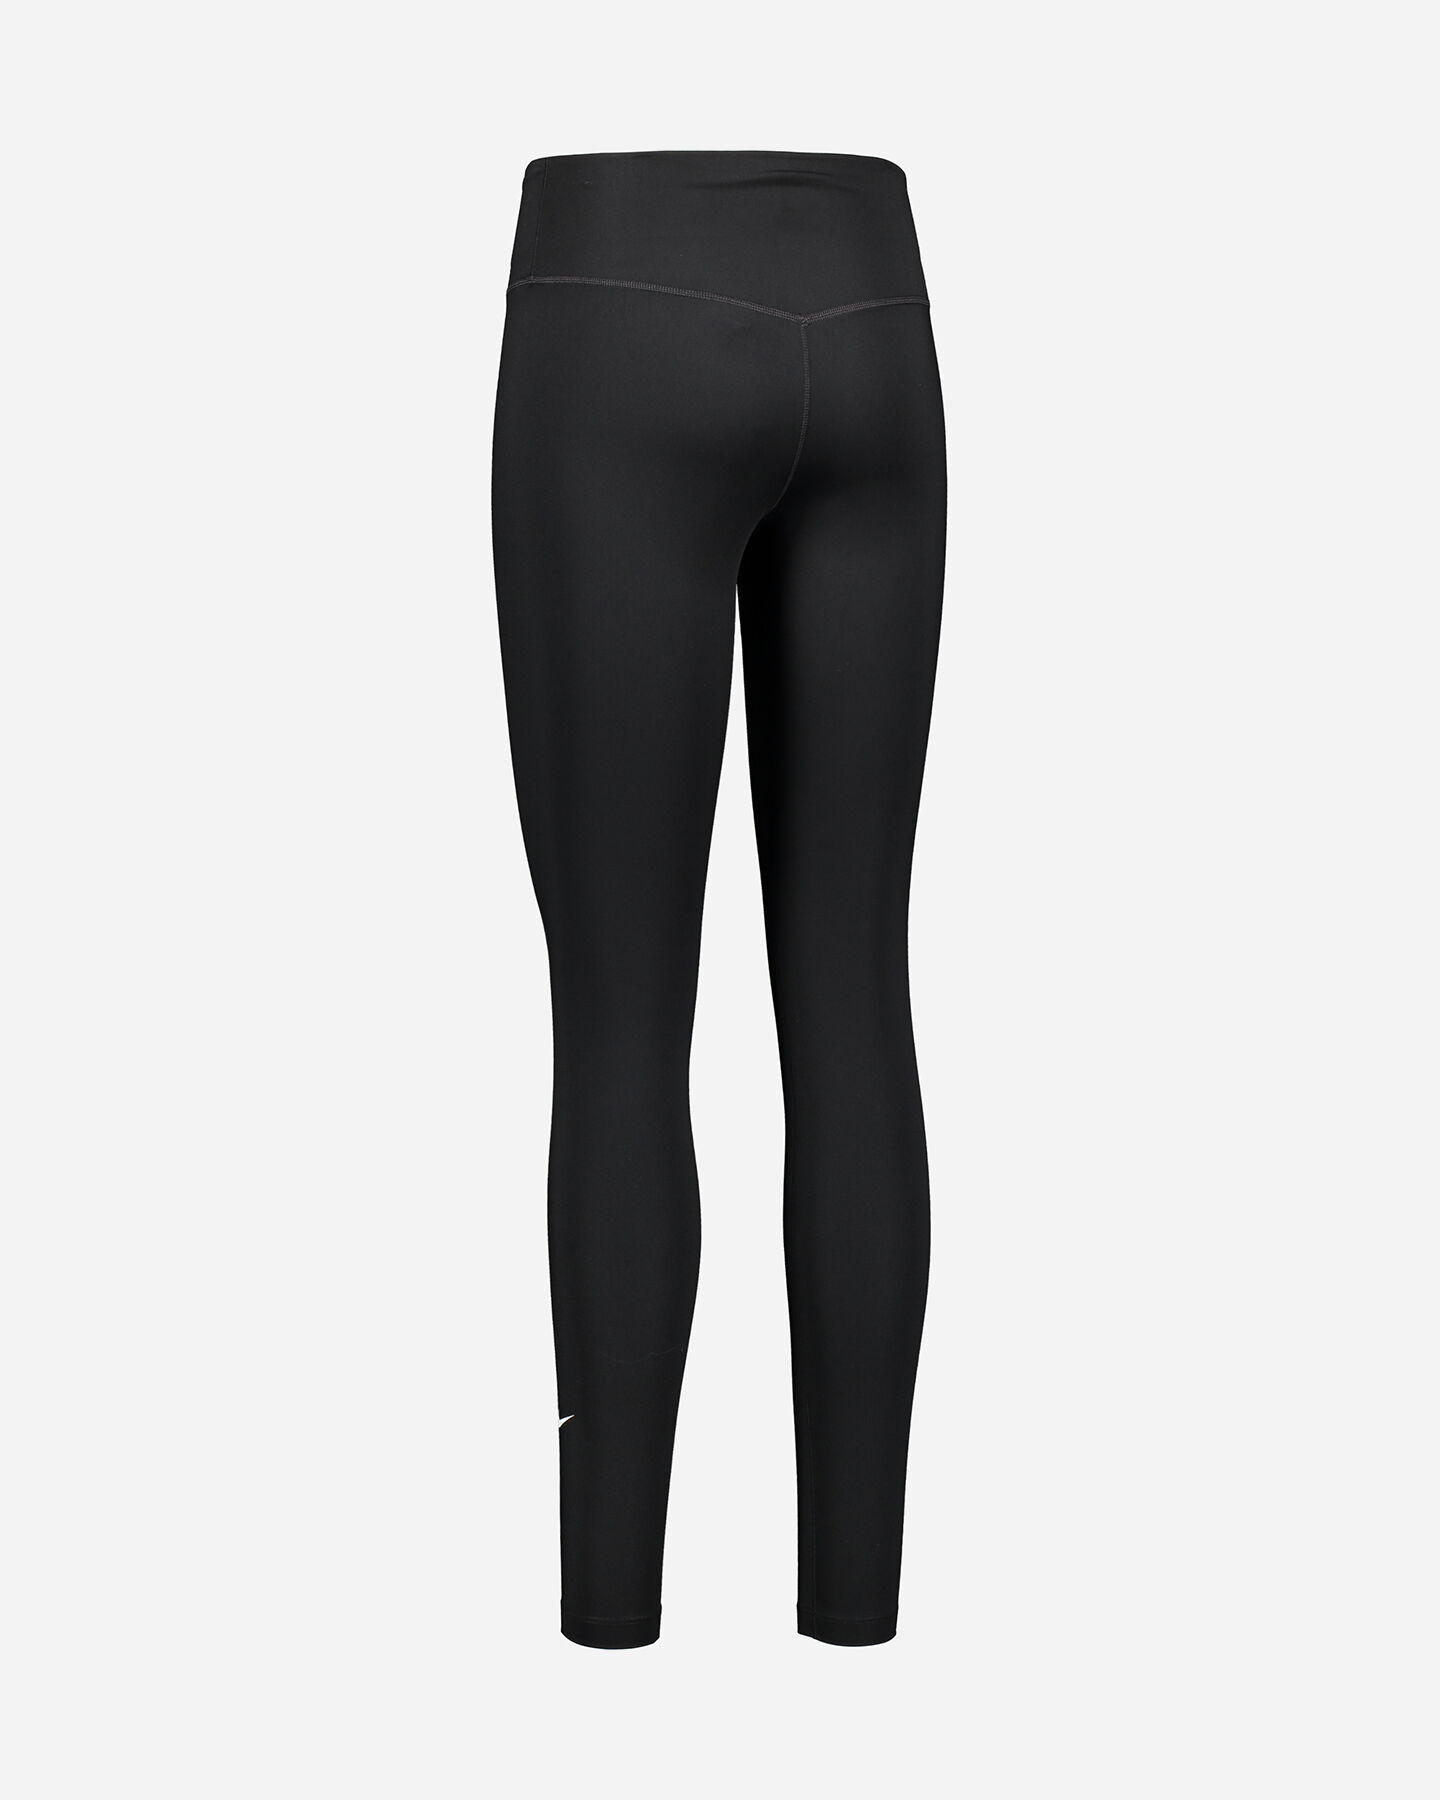  Leggings NIKE ONE HIGH RISE W S5270290 scatto 2